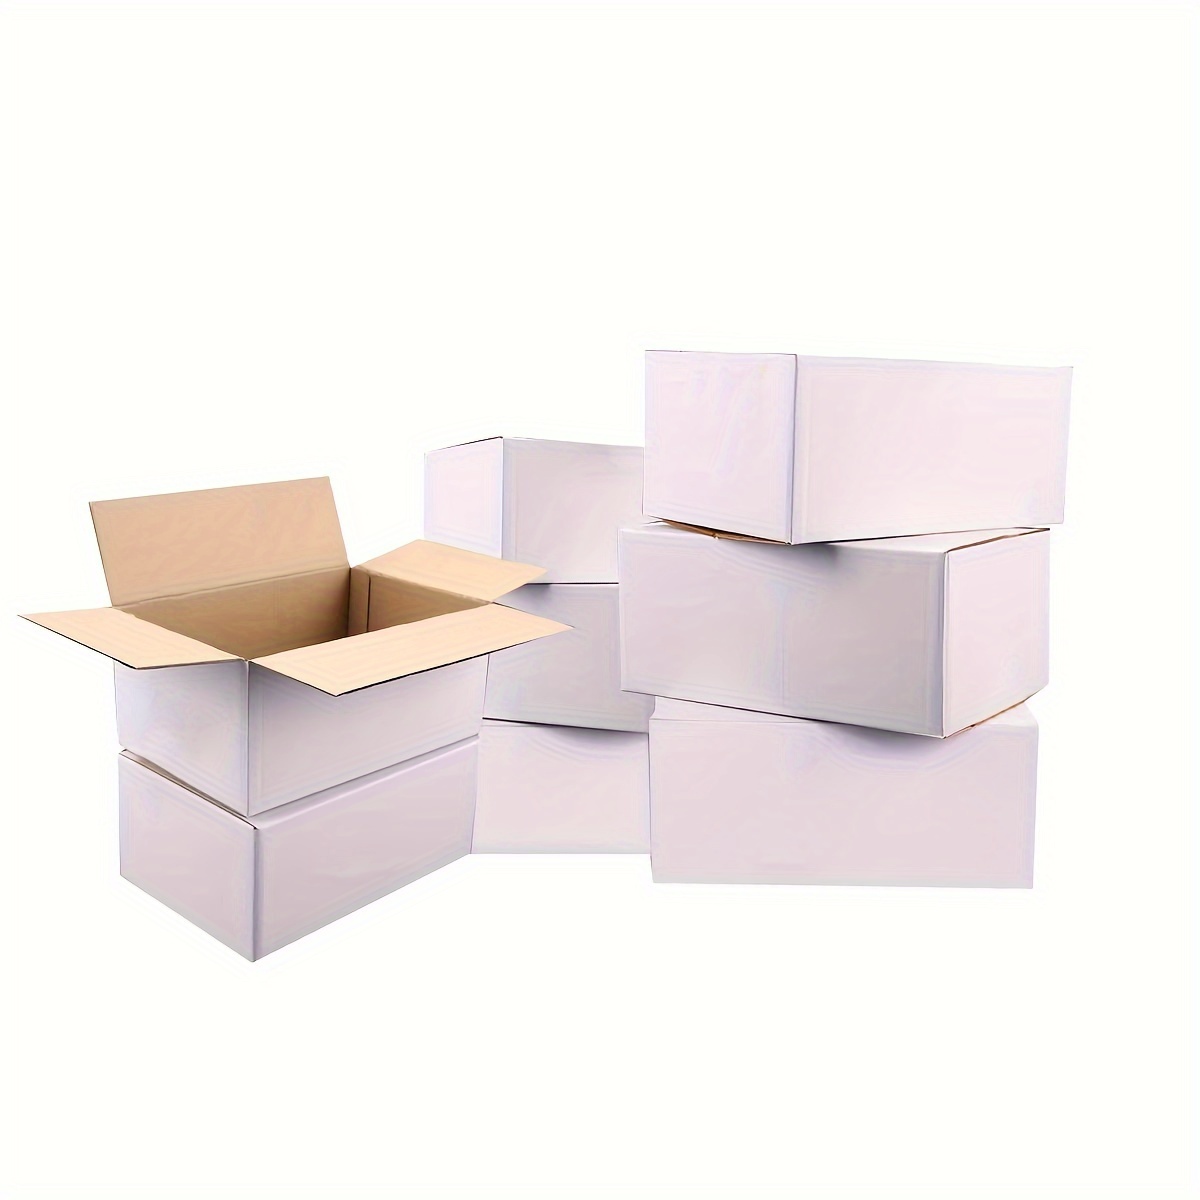 Golden State Art, 6x4x3 Pink Shipping Boxes 26 Pack, Small Cardboard  Corrugated Mailer Boxes for Shipping Packaging Craft Gifts Giving Products